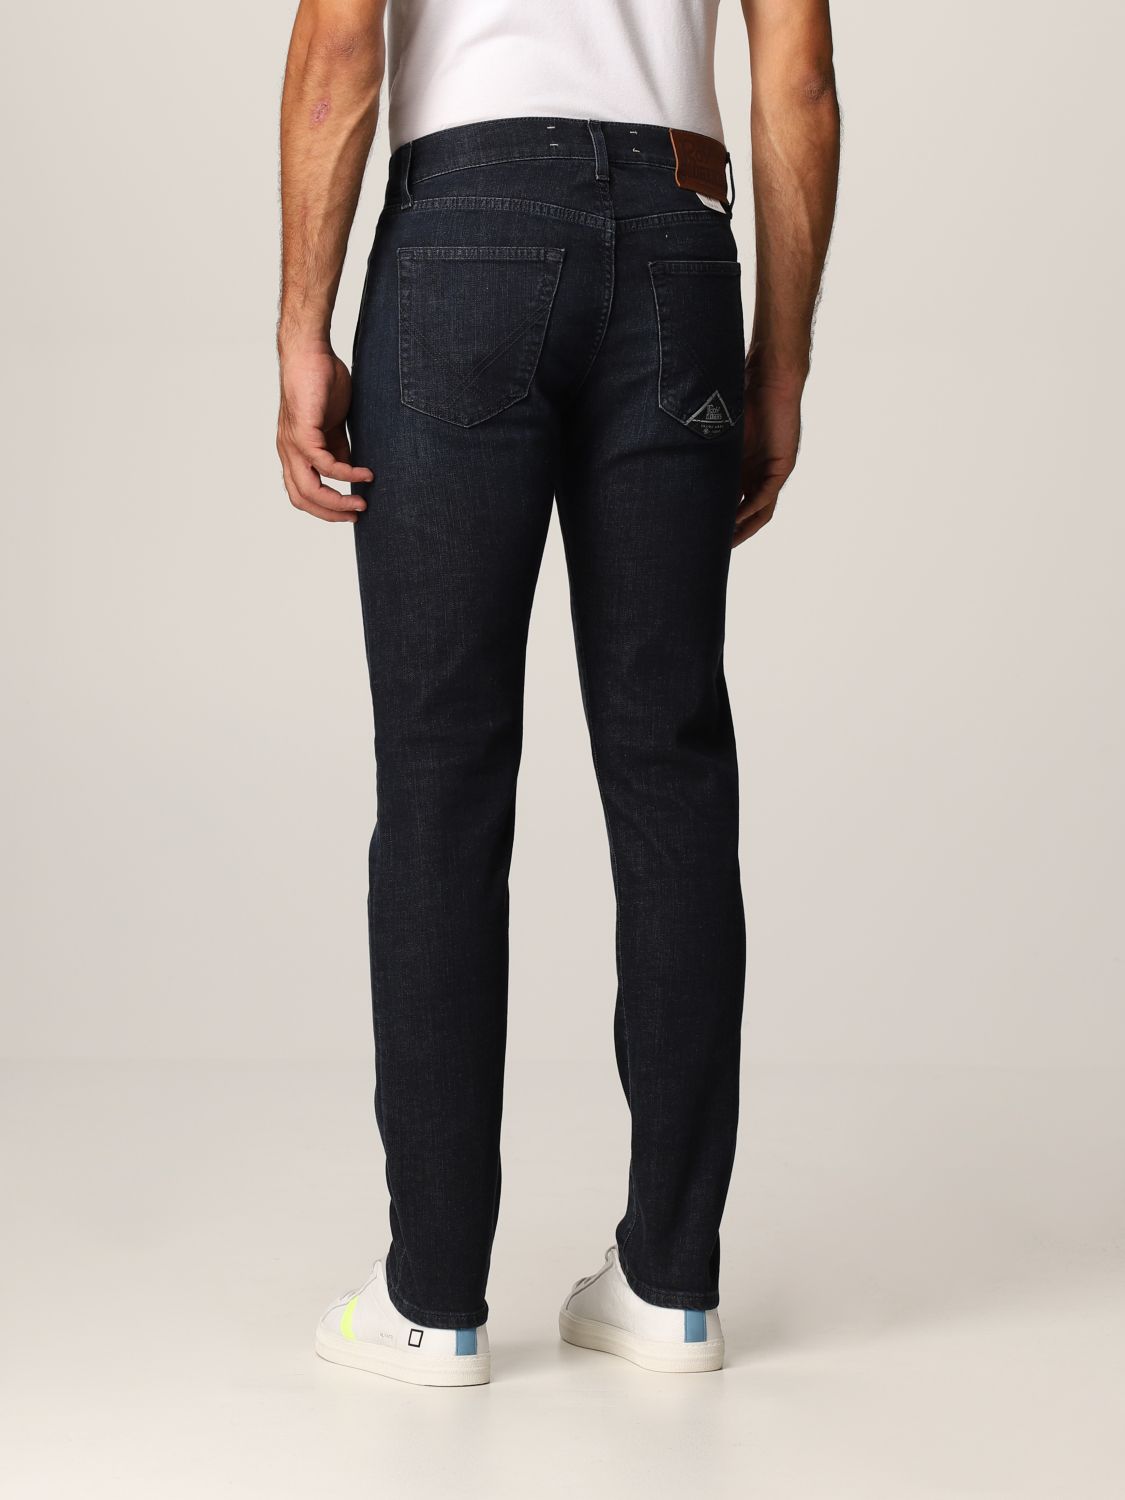 Jeans Roy Rogers: Jeans Roy Rogers in denim stretch denim 2